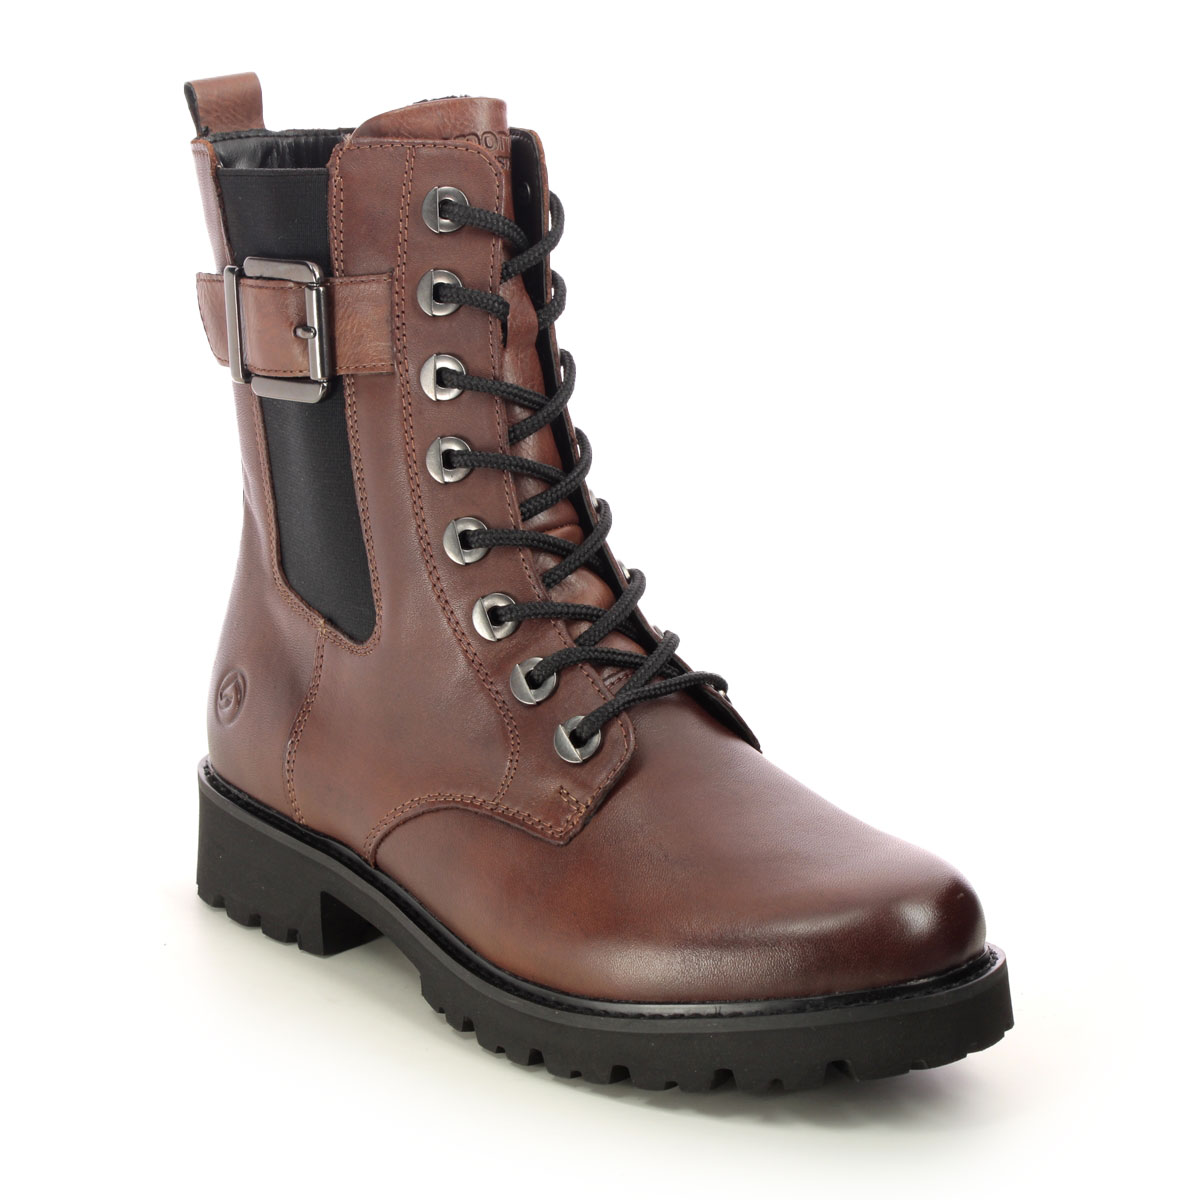 Remonte Doclachel Elle Brown Leather Womens Biker Boots D8668-22 In Size 40 In Plain Brown Leather